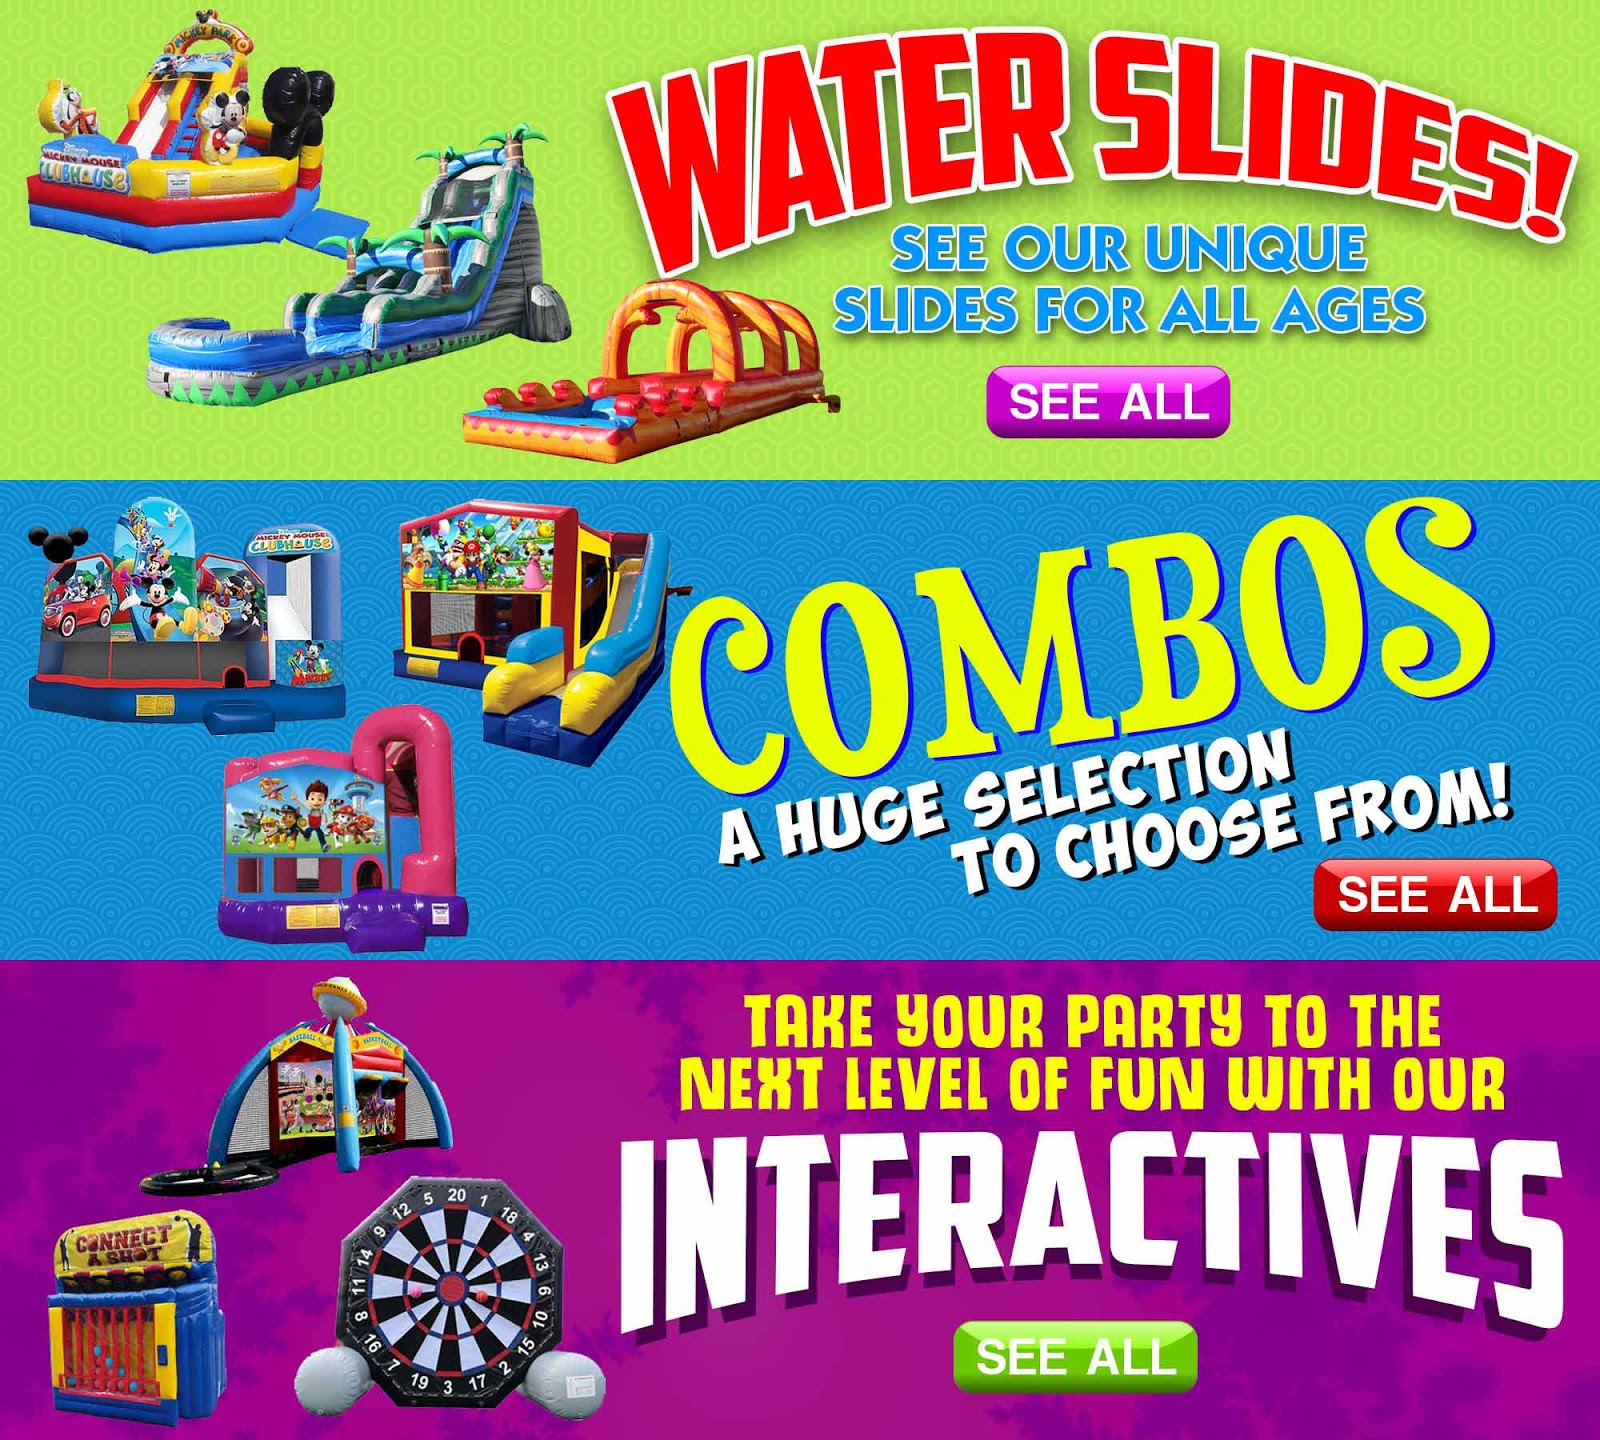 Water Slide Rentals New Orleans Firm Updates Website For Hot Summer Events  « MarketersMEDIA – Press Release Distribution Services – News Release  Distribution Services